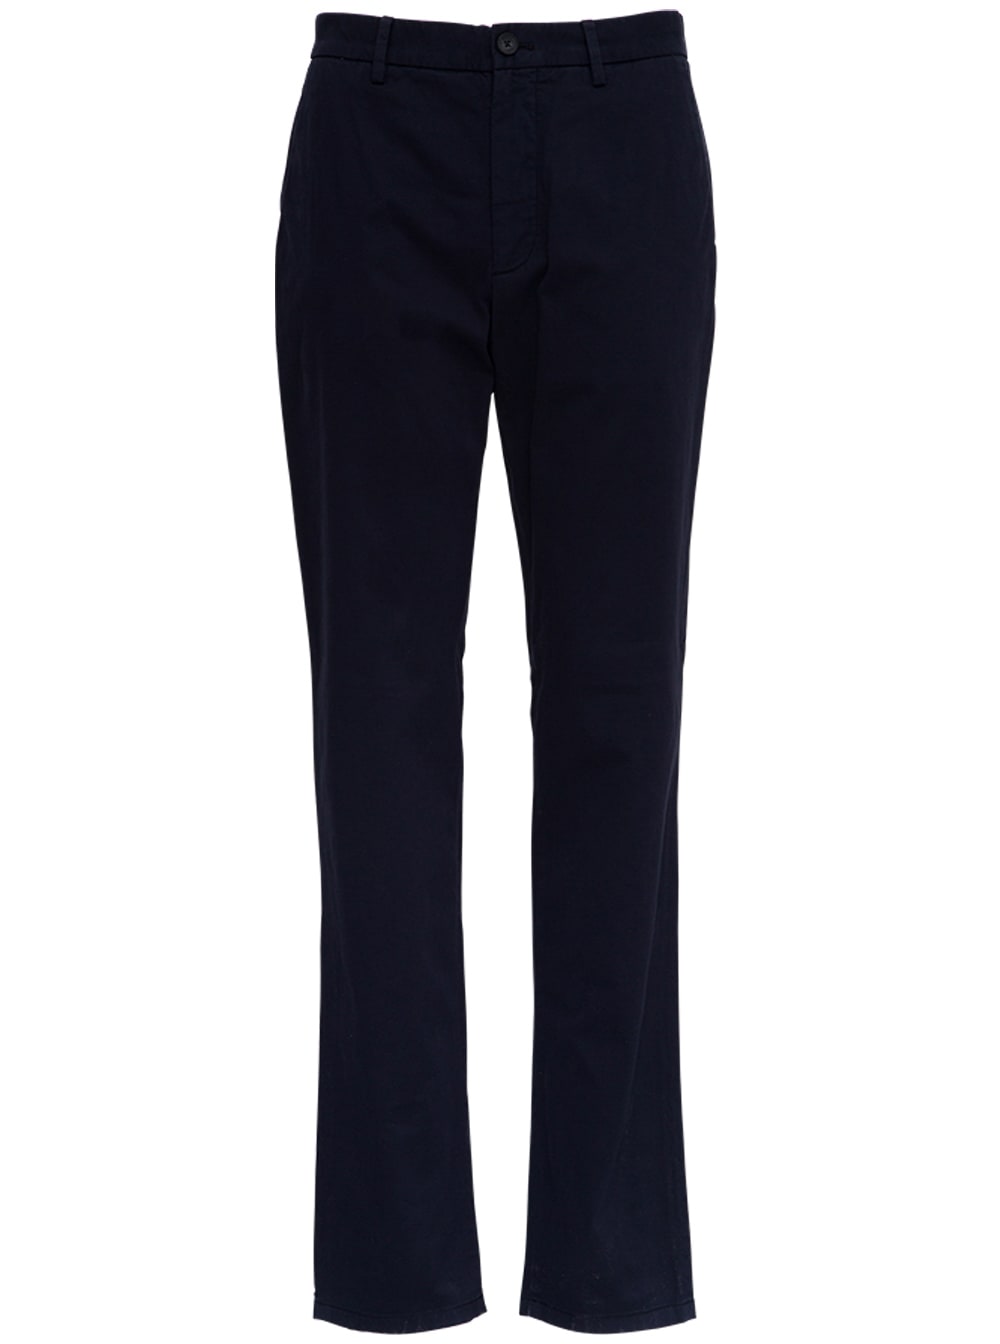 Z Zegna Blue Cotton Tailored Trousers